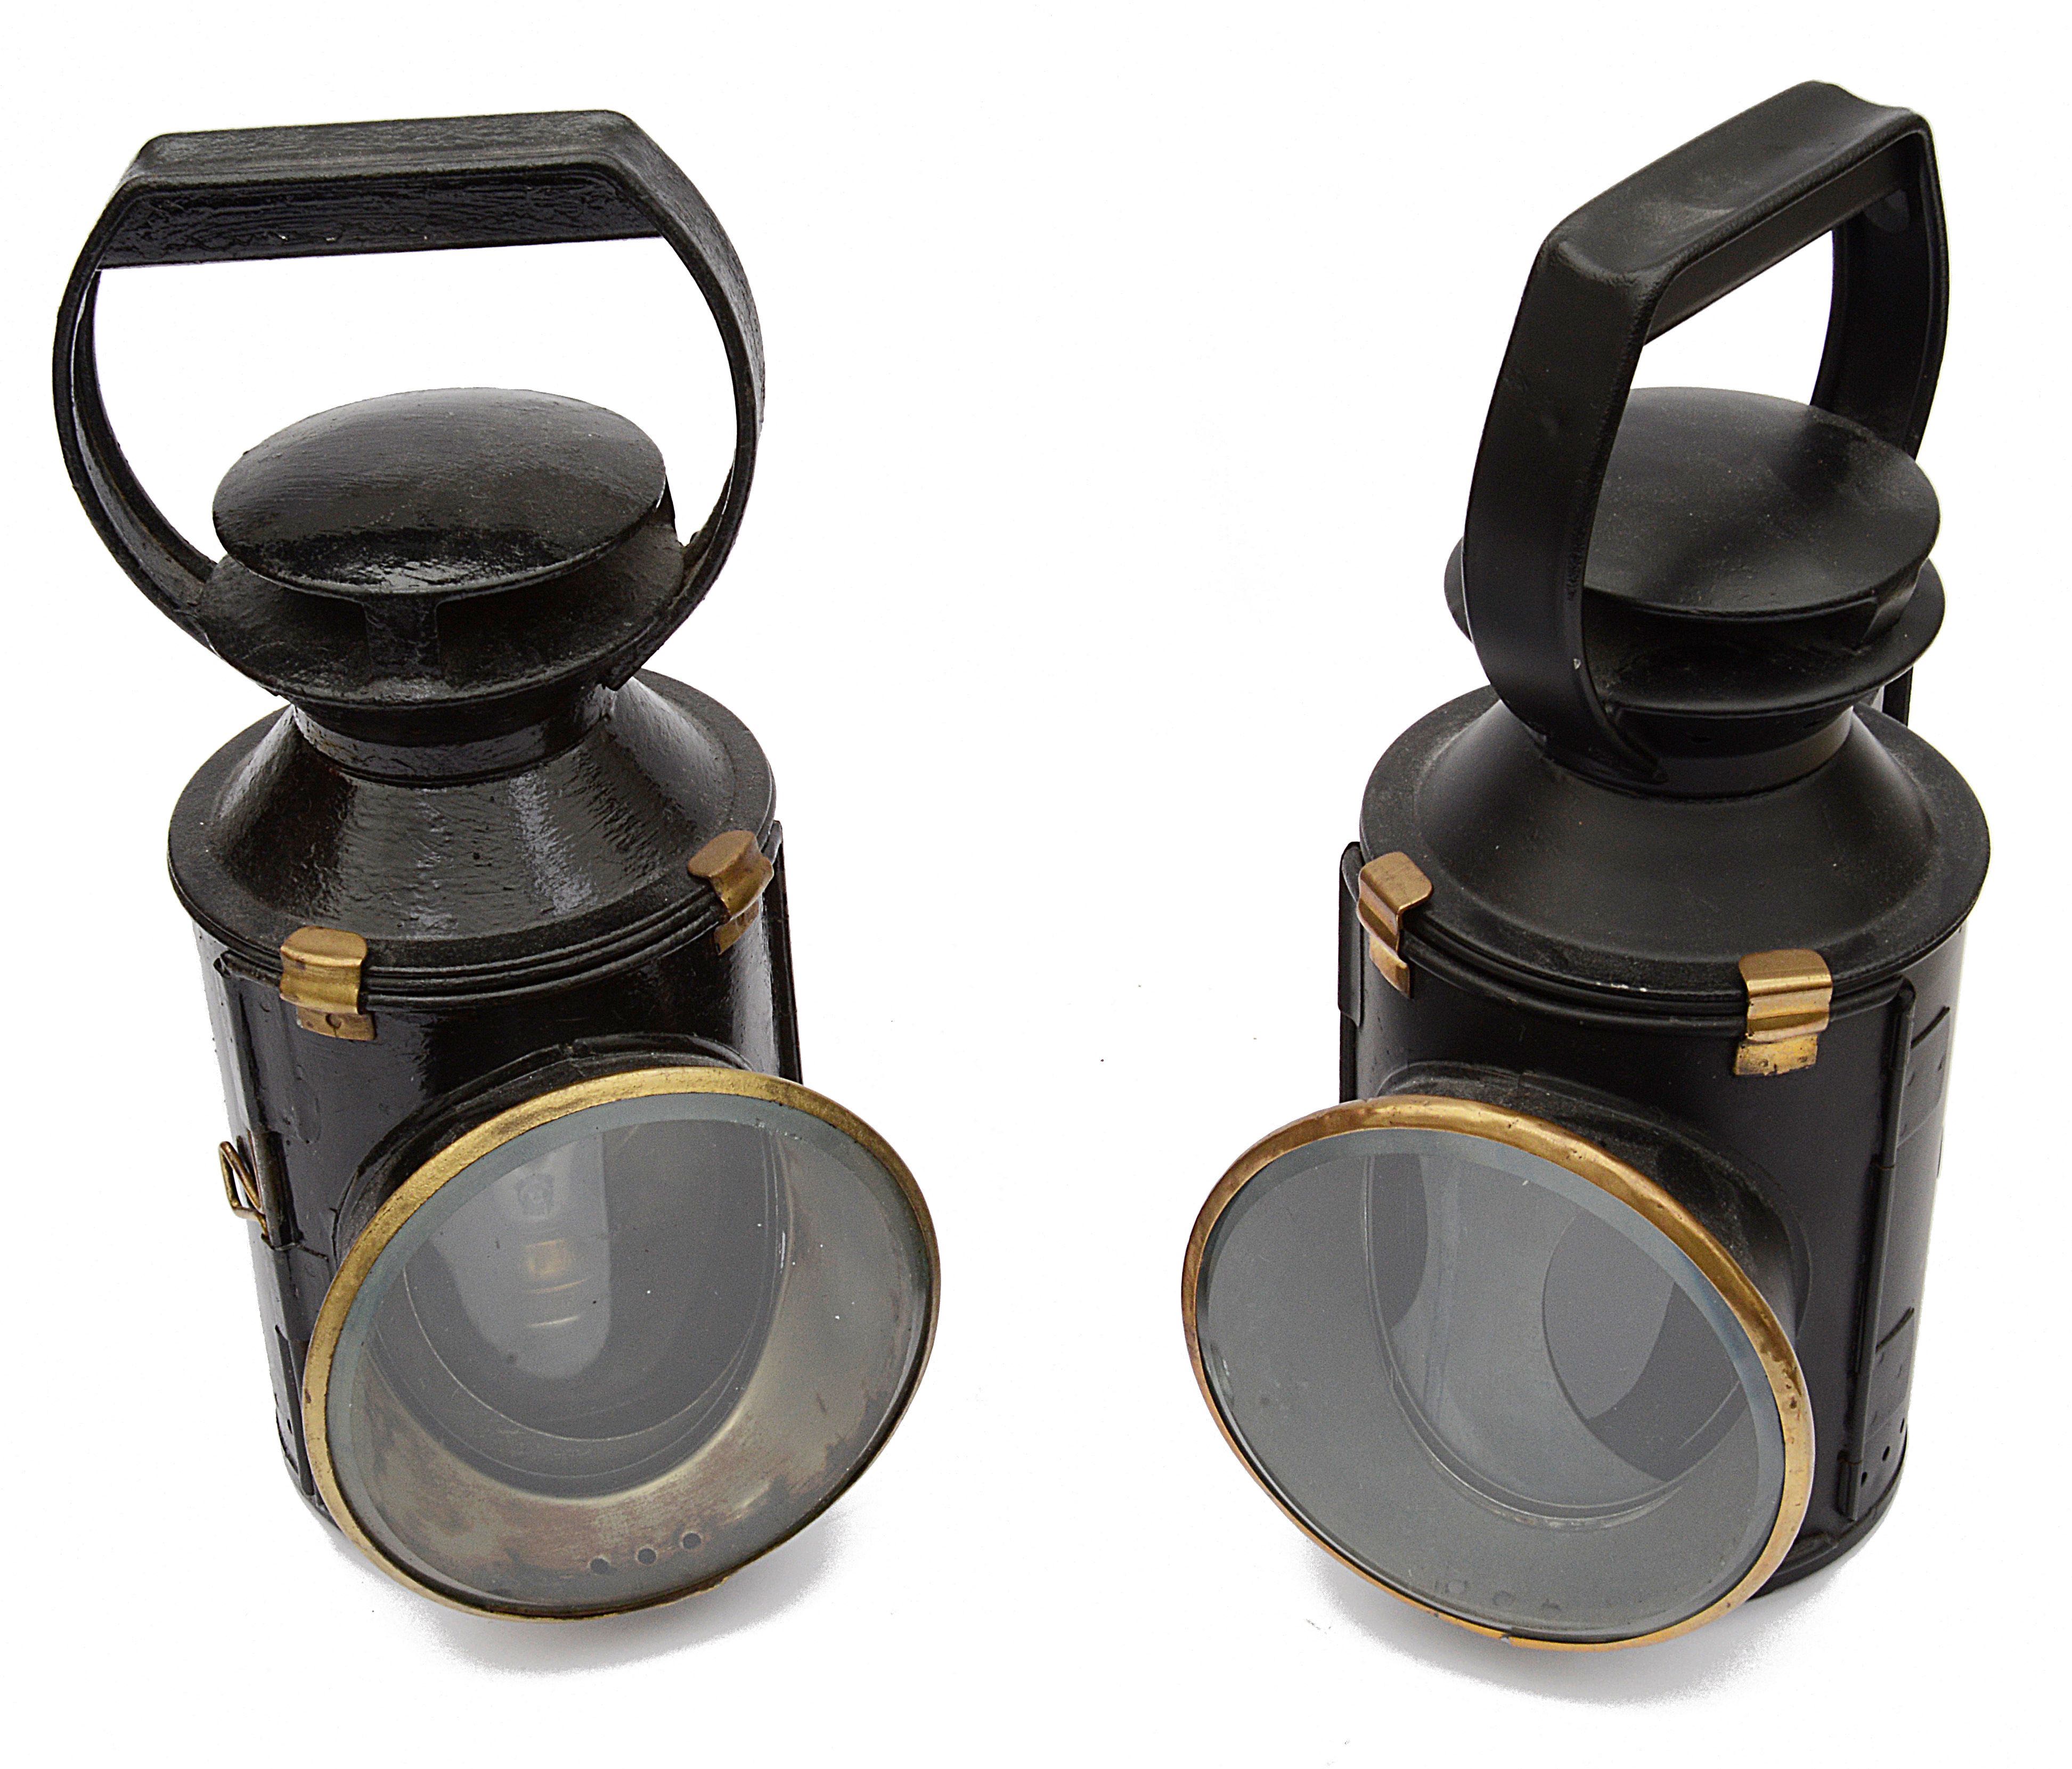 A collection of British Railway and other signal lamps and lanternsto include four three-lens lamps, - Image 3 of 6